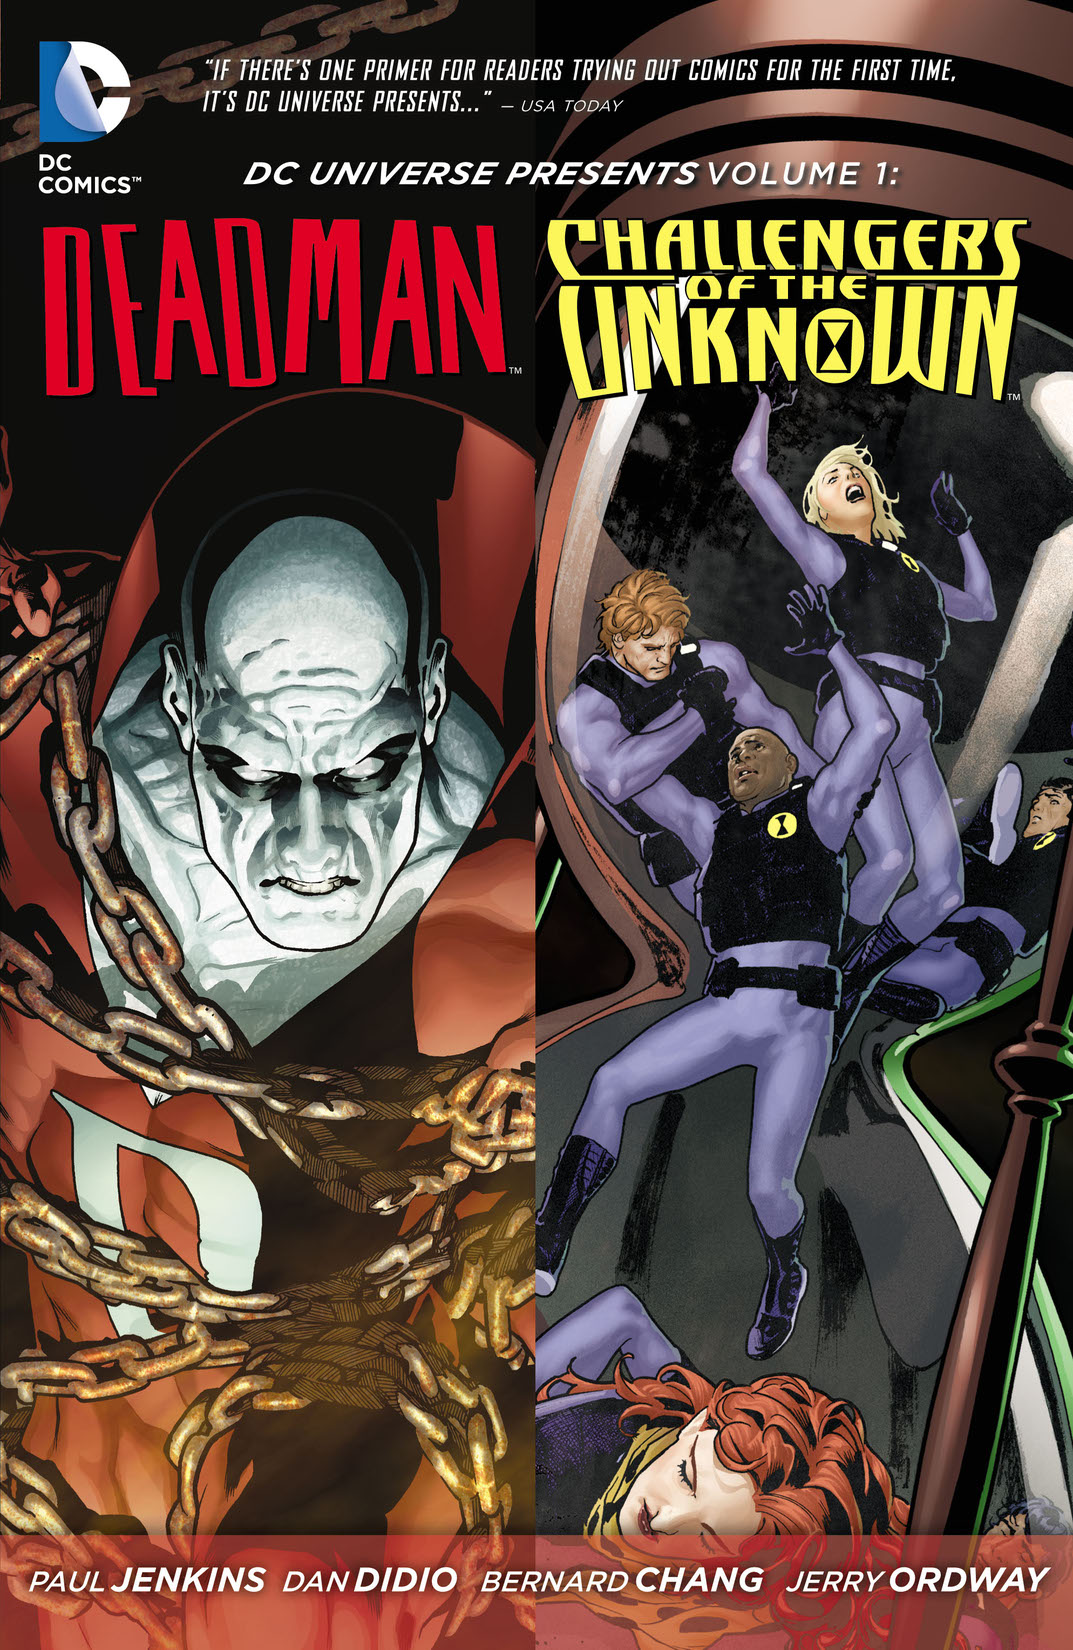 DC Universe Presents Vol. 1 featuring Deadman & Challengers of the Unknown preview images